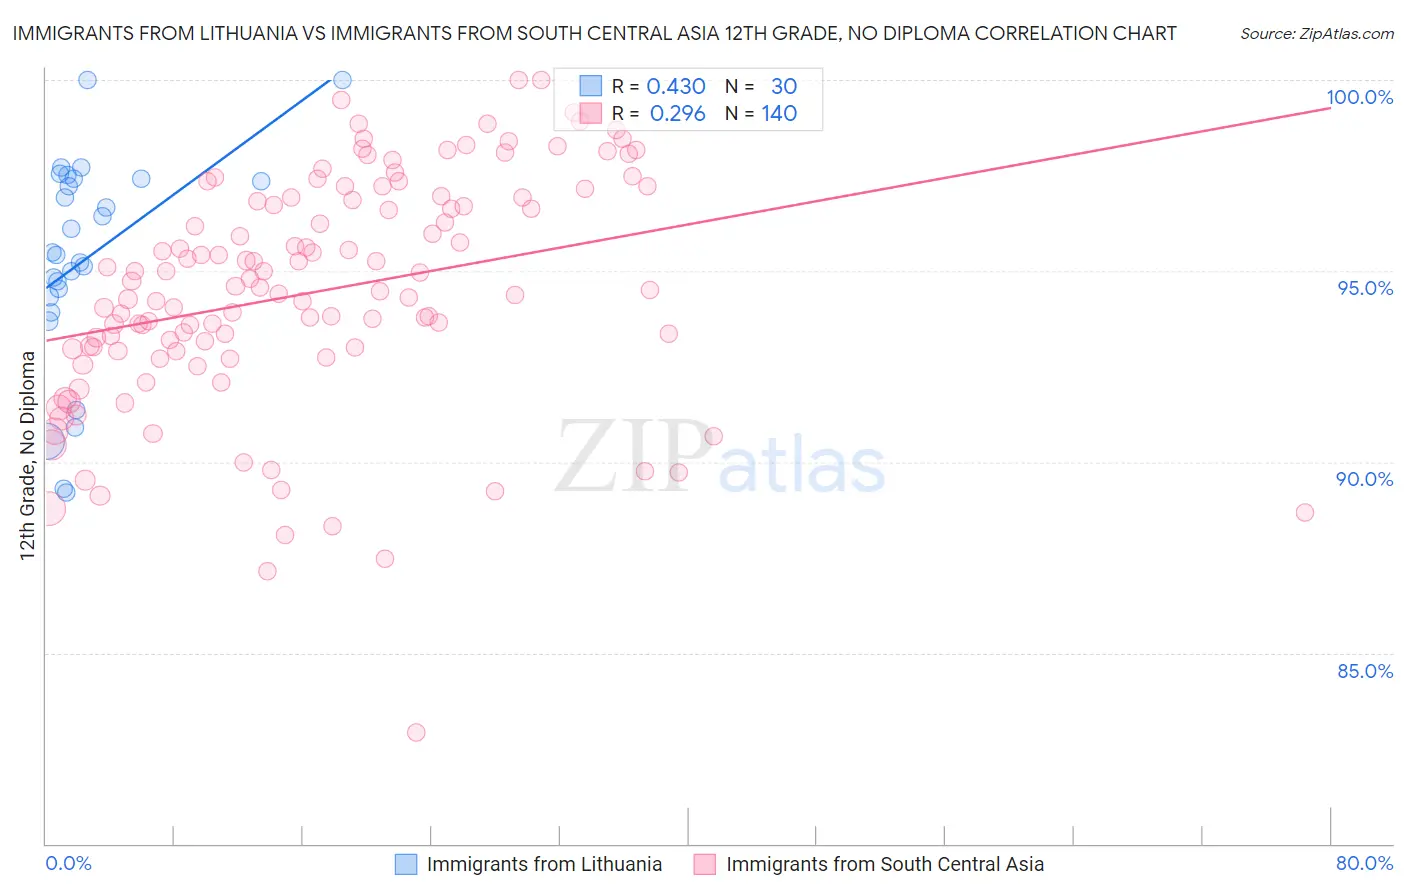 Immigrants from Lithuania vs Immigrants from South Central Asia 12th Grade, No Diploma